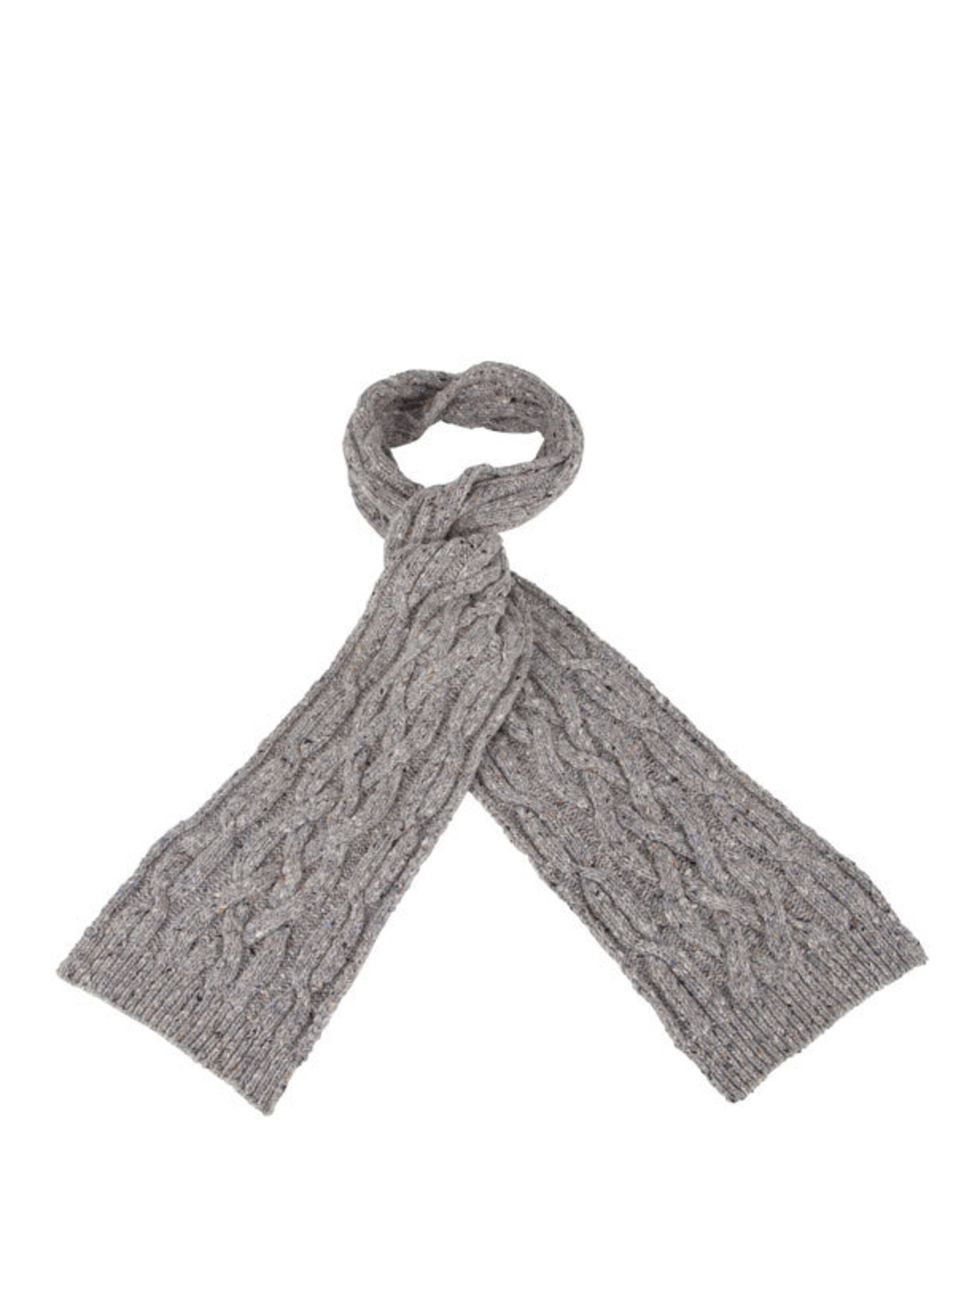 <p>Nothing is as cosy a cable knit scarf, so wrap up in style with a classic Paul Smith number <a href="http://www.paulsmith.co.uk/shop/paul-smith-womens-scarves-446/paul-smith-scarf-cable-knit-scarf-wexa-587a-v09-l/product.html">Paul Smith</a> cable kni